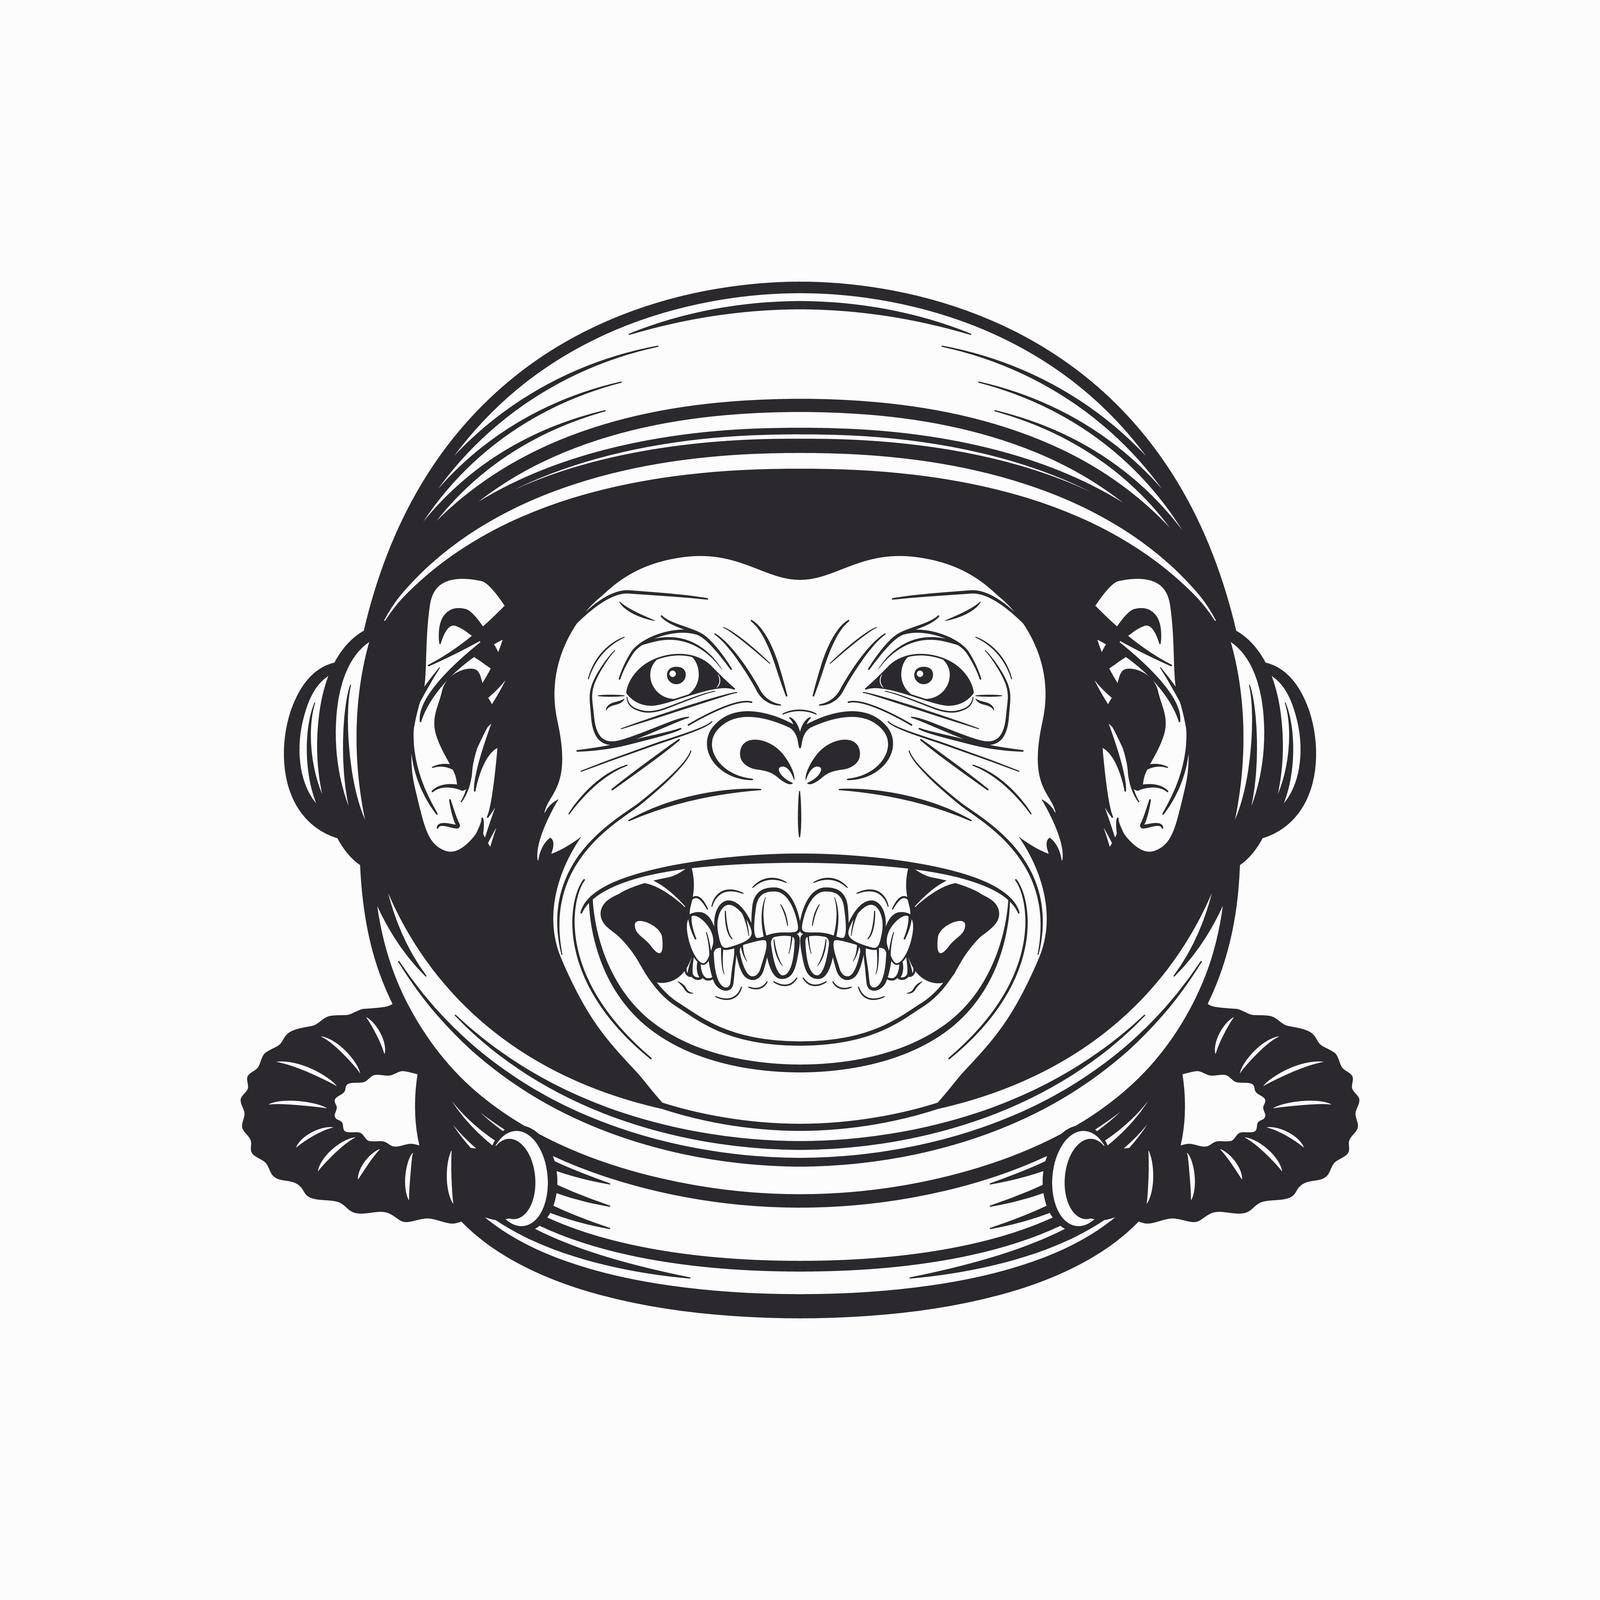 Vector Smiling Chimpanzee Ape with Astronaut Helmet, Funny Monkey with Cosmonaut Mask for Space Exploration. Spaceman Head Protection for Wall Art, T-shirt Print, Poster. Cartoon Cute Chimp Monkey.